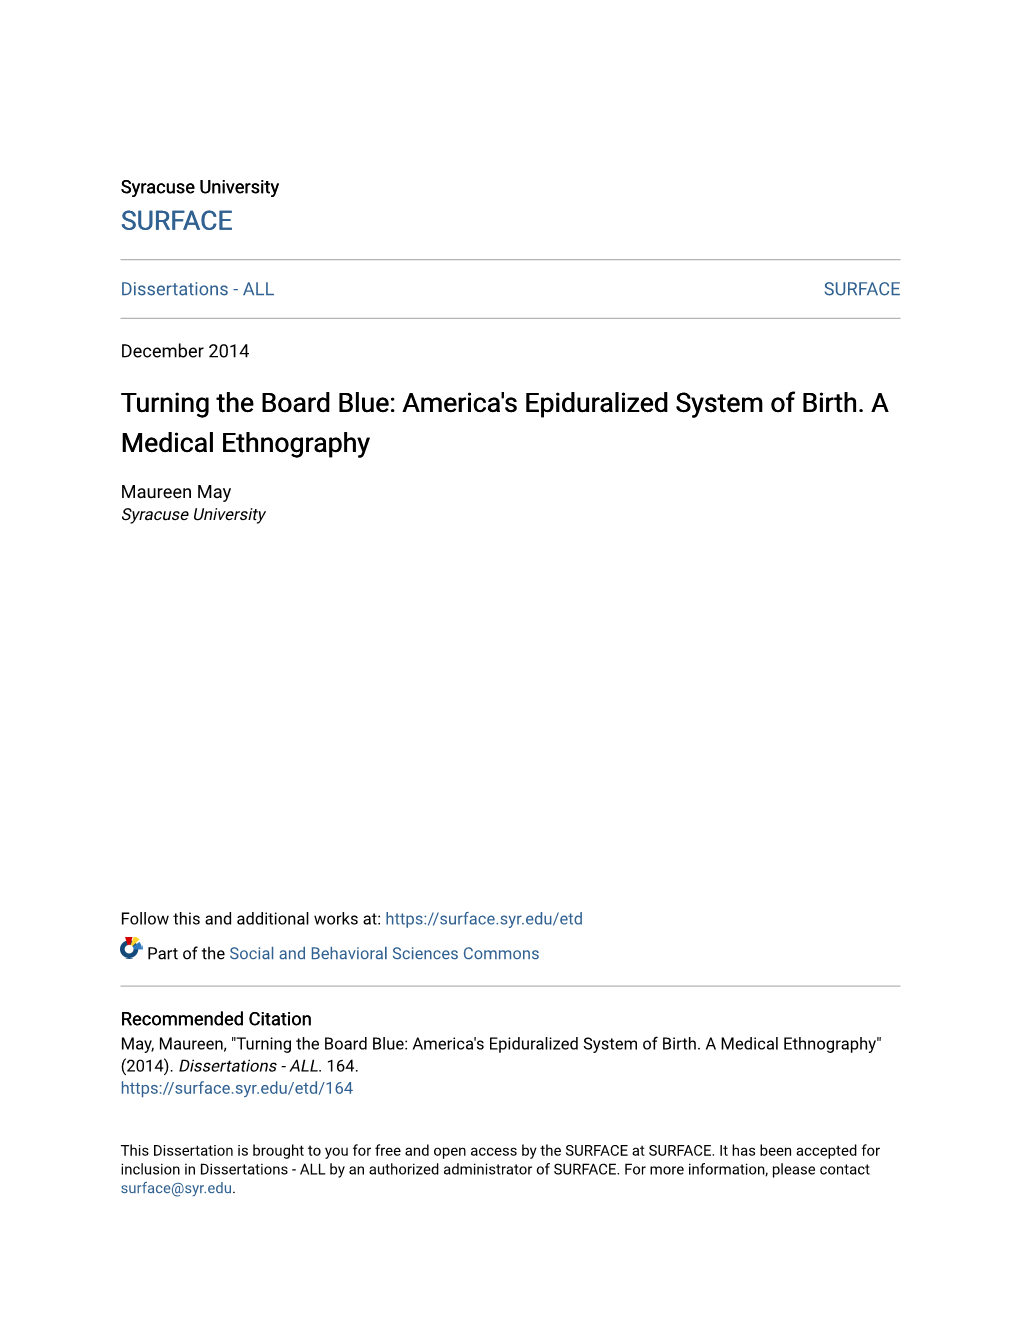 America's Epiduralized System of Birth. a Medical Ethnography